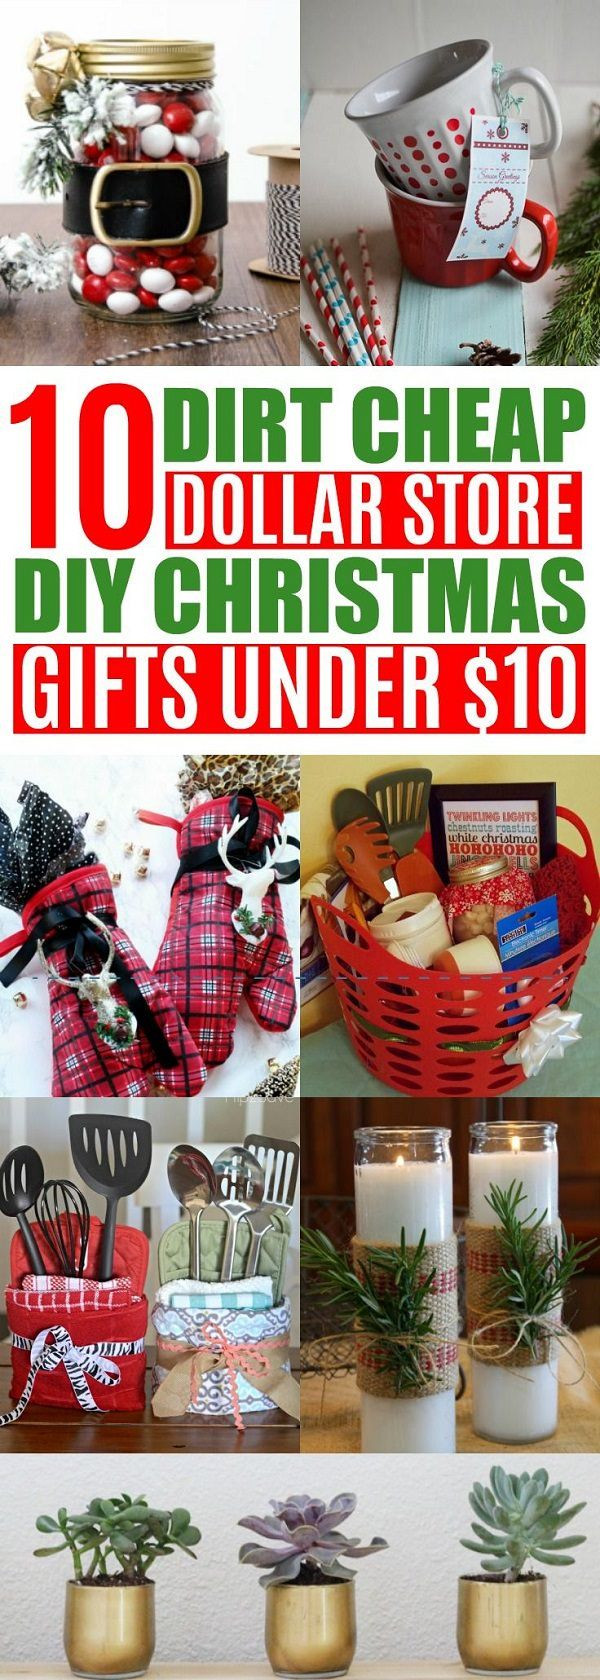 Office Christmas Party Gift Ideas
 25 unique fice christmas ts ideas on Pinterest